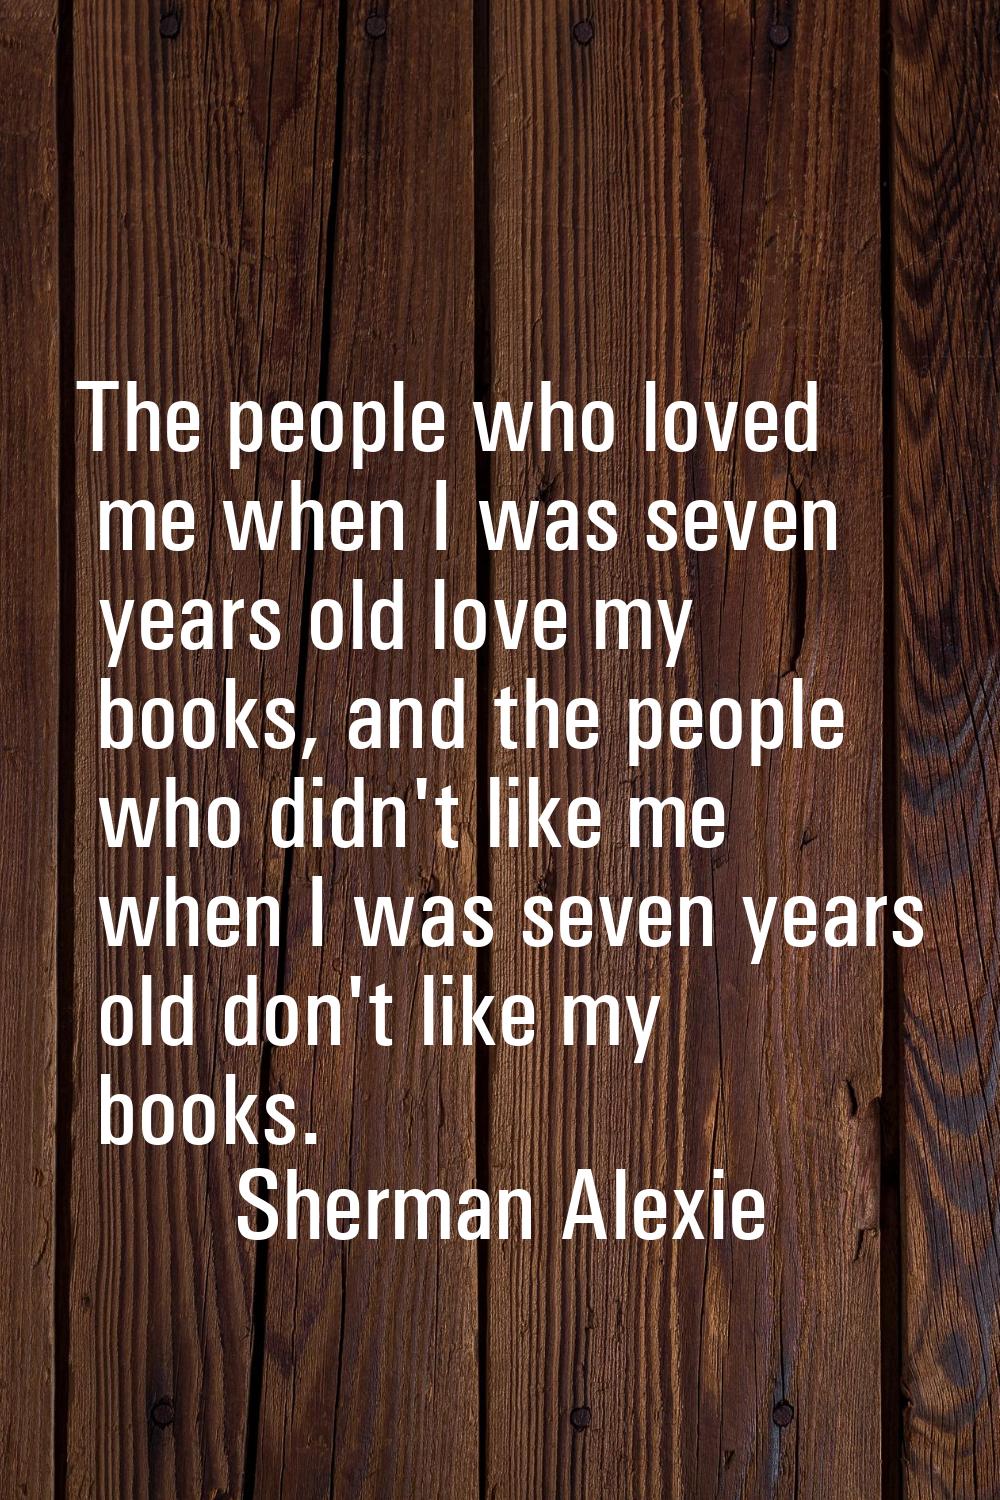 The people who loved me when I was seven years old love my books, and the people who didn't like me